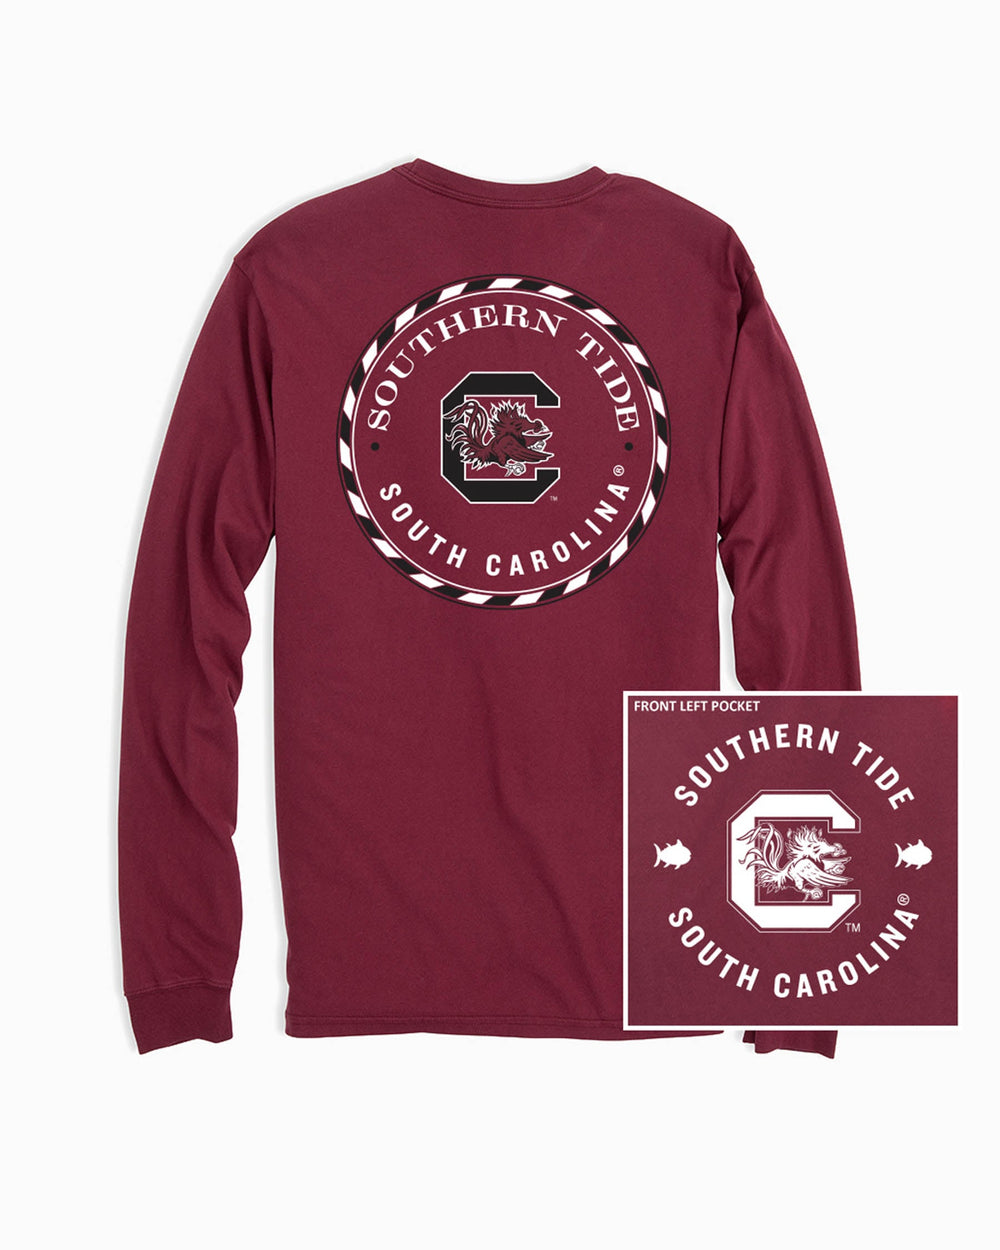 The front of the USC Gamecocks Long Sleeve Medallion Logo T-Shirt by Southern Tide - Chianti